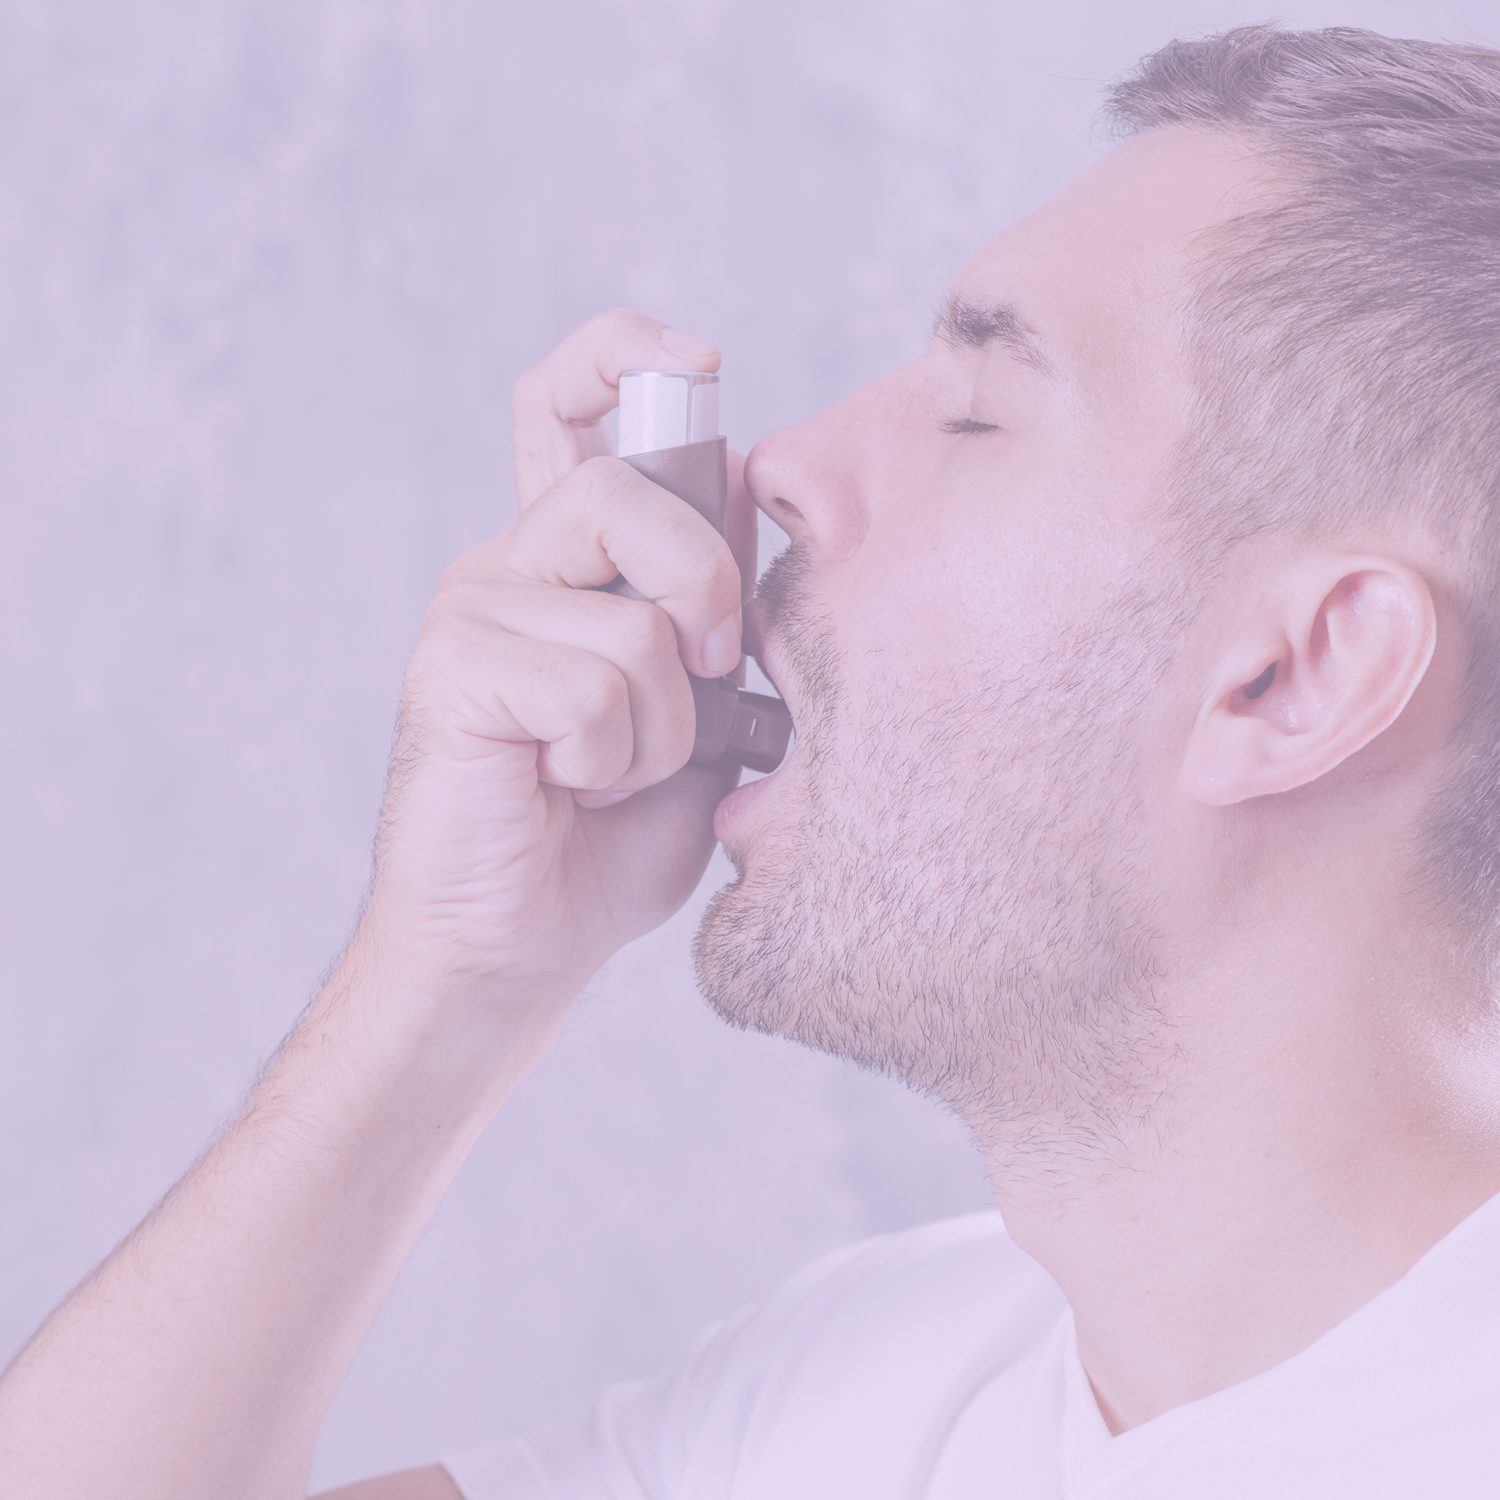  11 Natural Remedies for Allergic Asthma